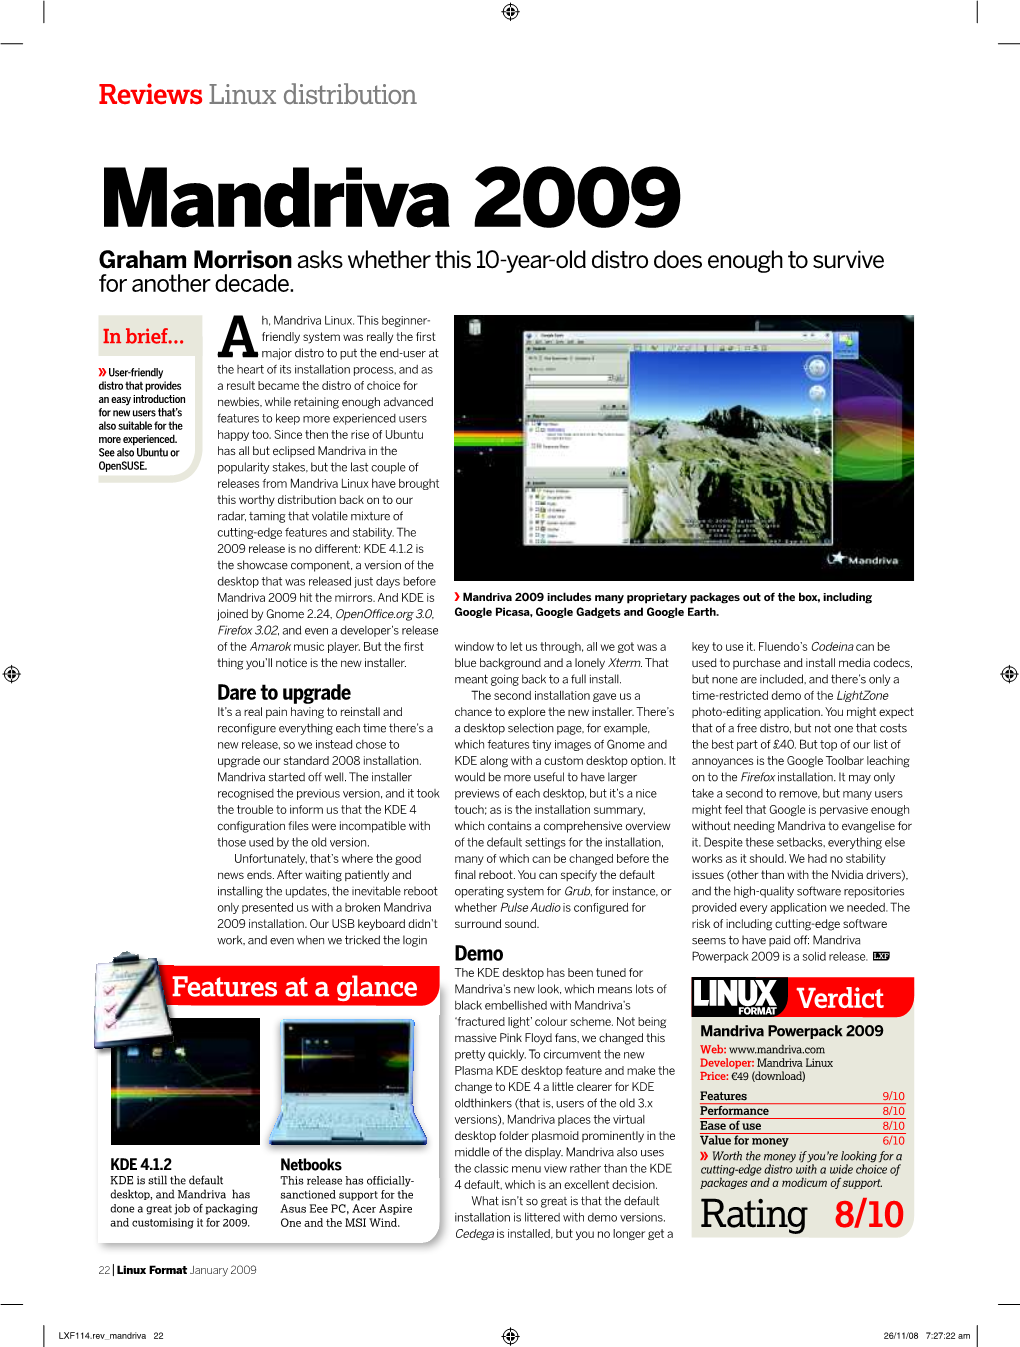 Mandriva 2009 Graham Morrison Asks Whether This 10-Year-Old Distro Does Enough to Survive for Another Decade